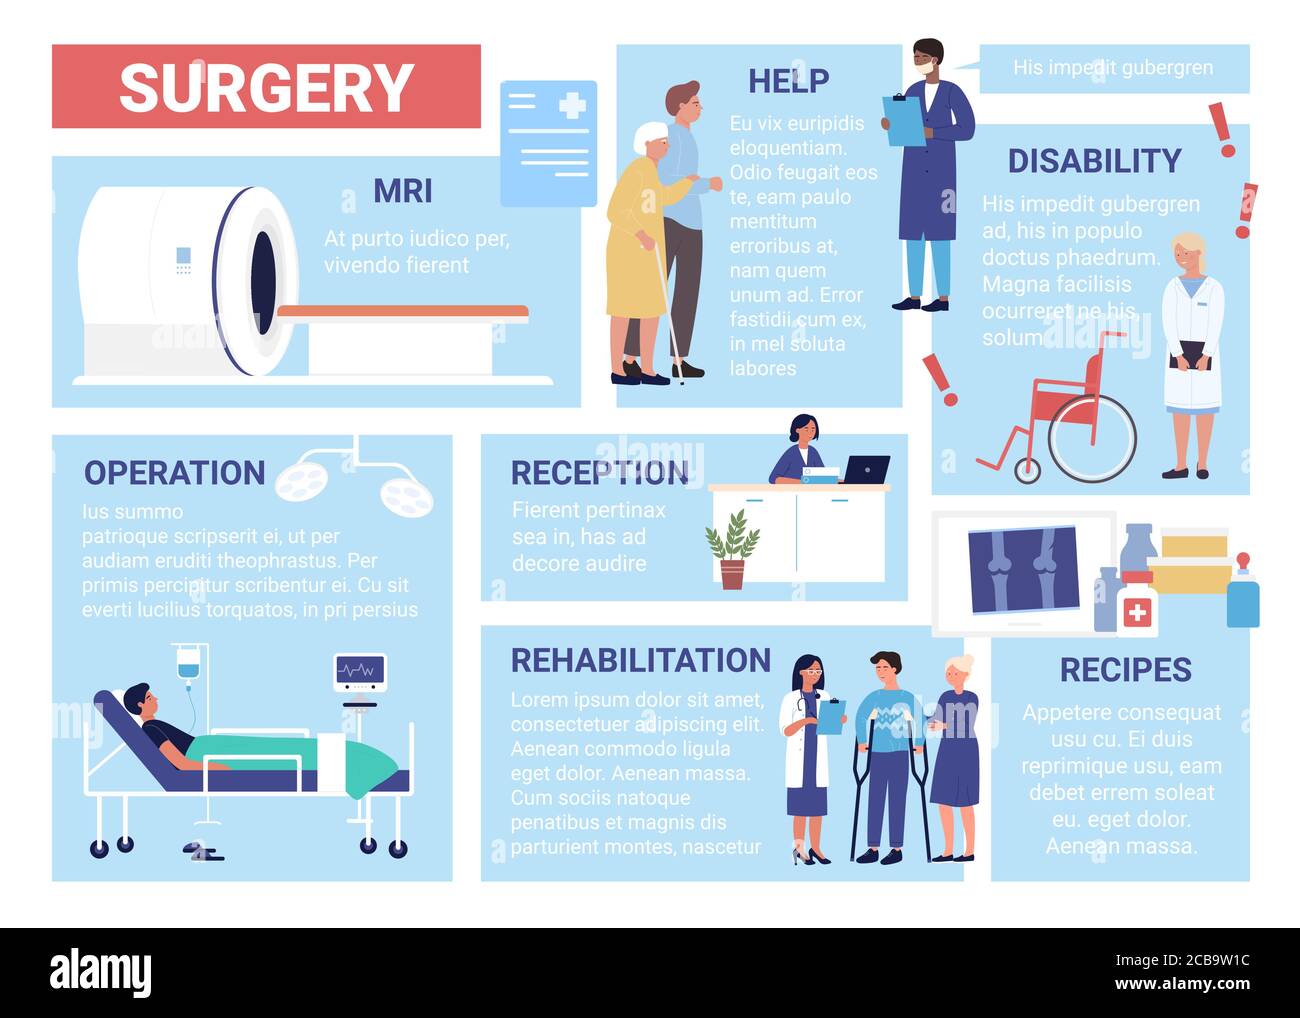 Surgery healthcare infographic vector illustration. Cartoon flat health care surgical hospital departments of reception, doctor medical checkup and treatment, clinic surgery medicine poster background Stock Vector